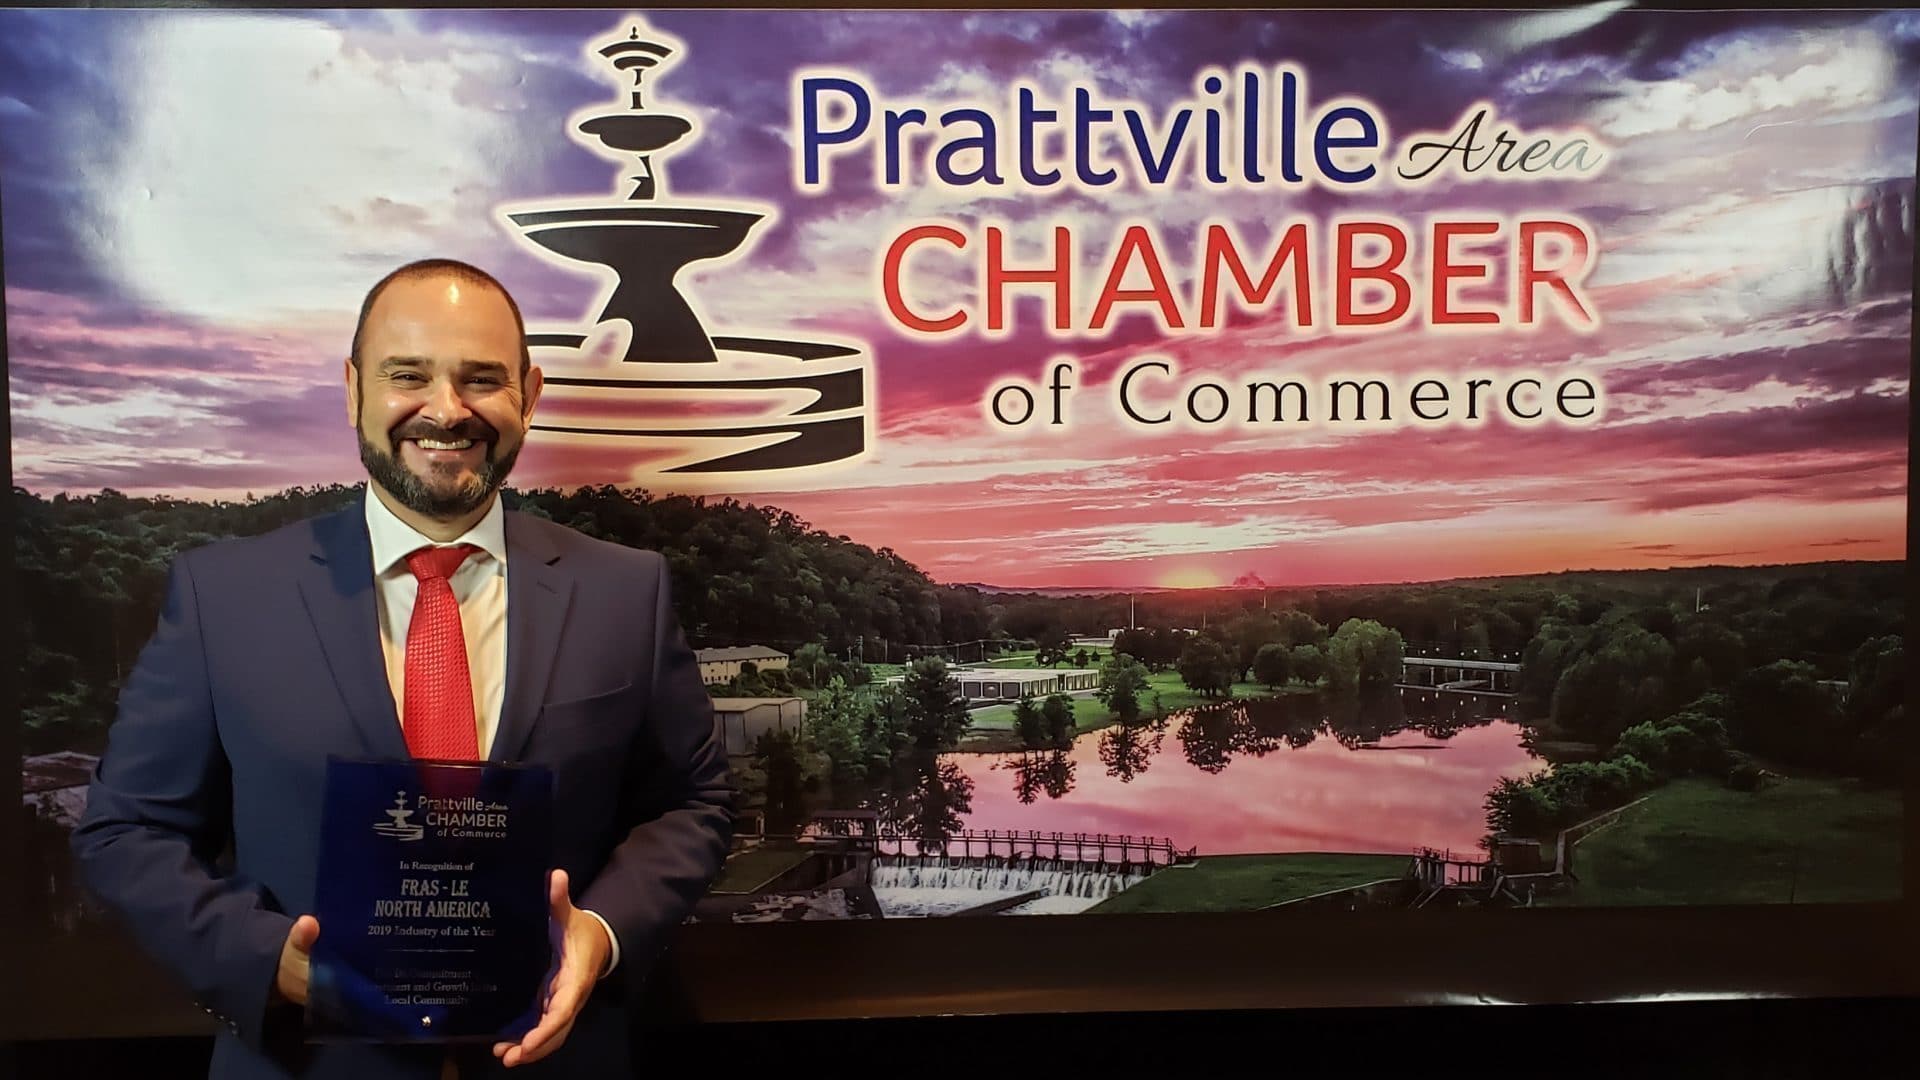 Fras-le North America Prattville’s 2019 Industry Of The Year